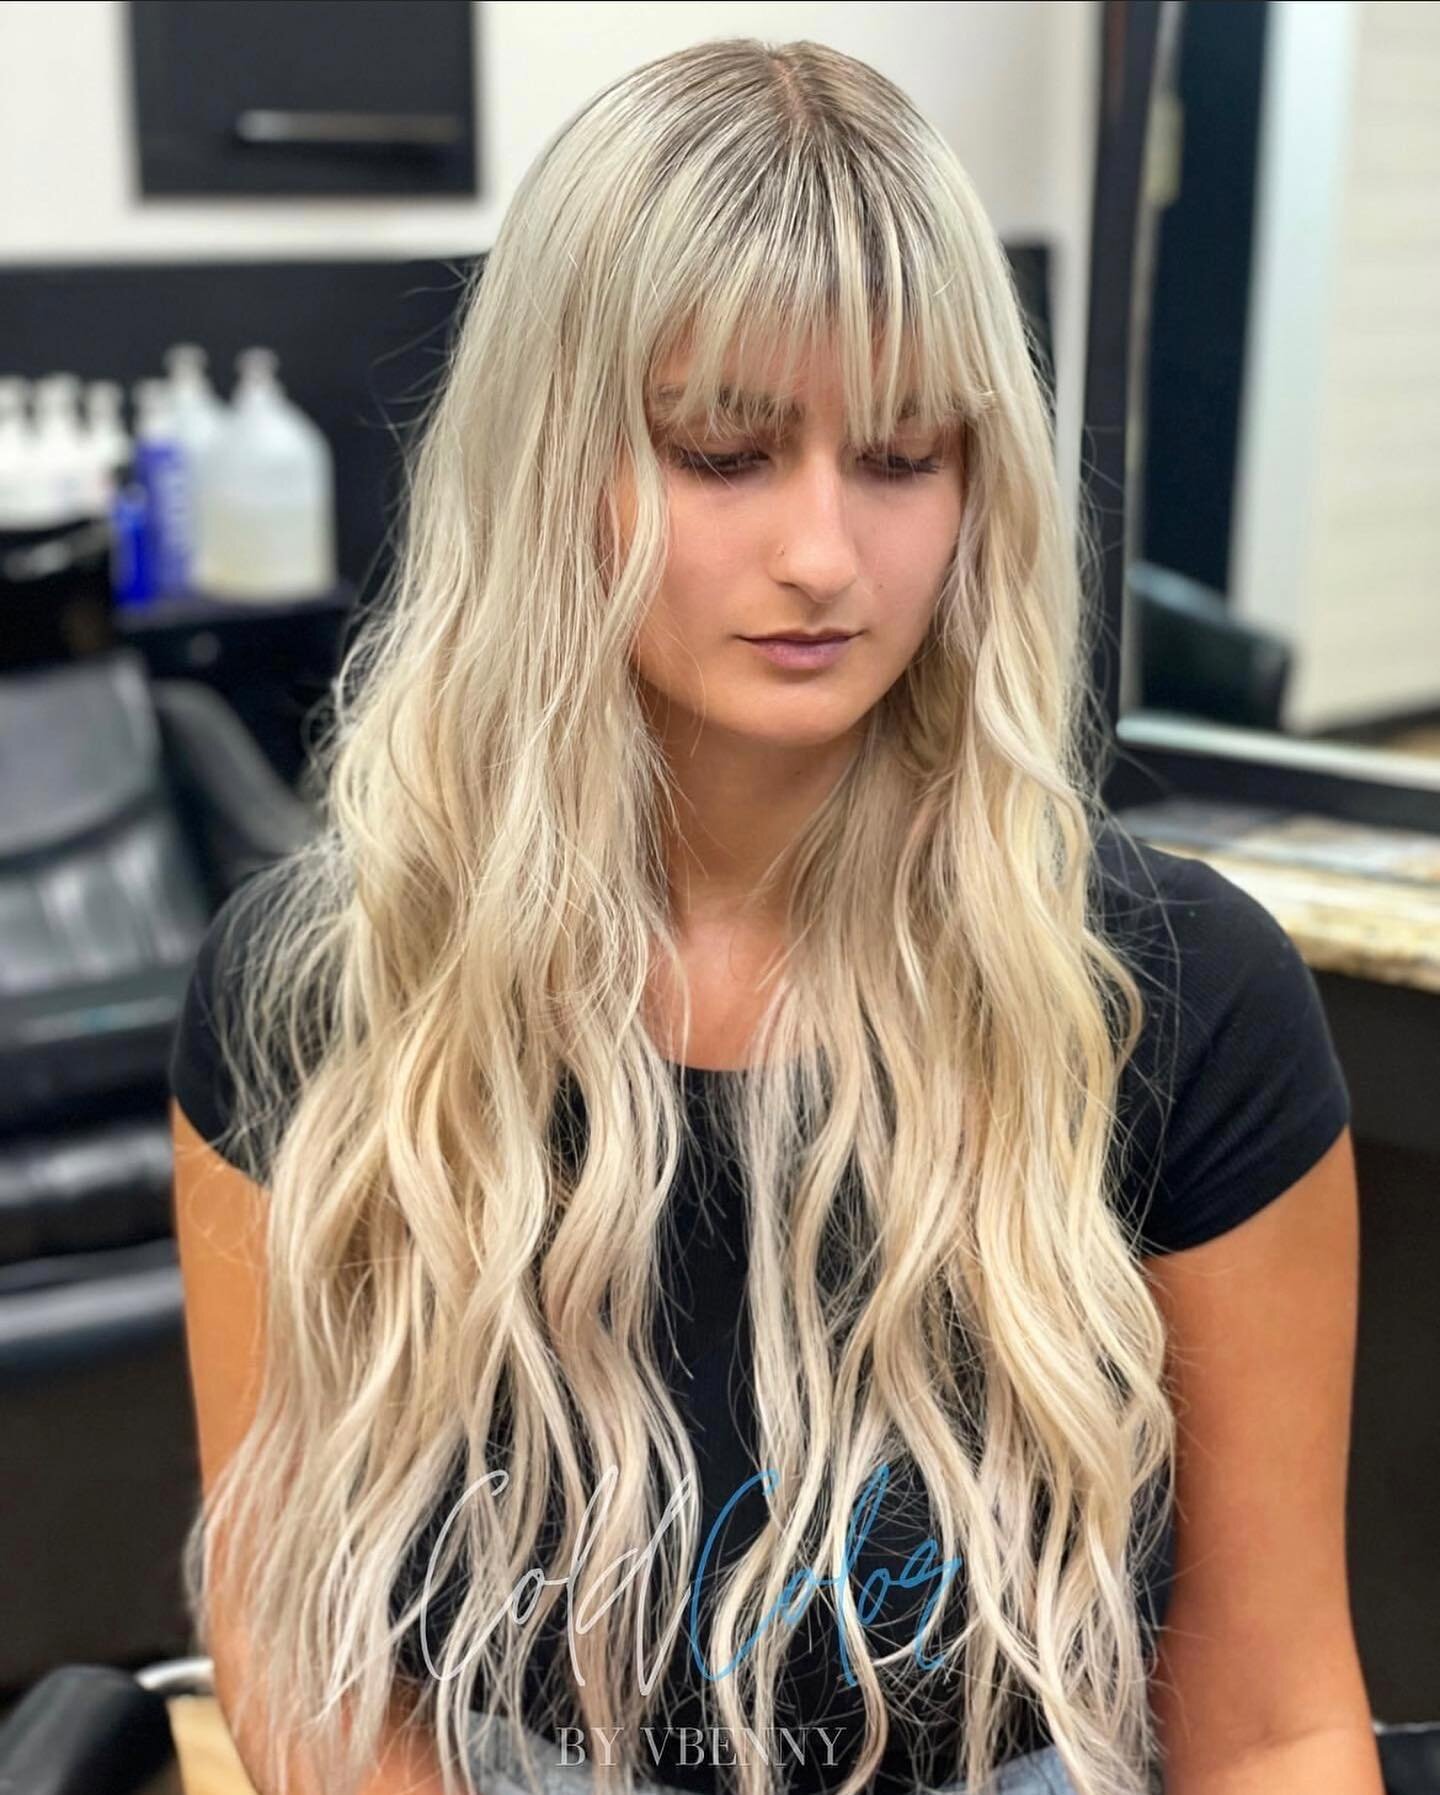 Beautiful extensions by Vanessa #tapeinextensions #bellamehairextensions #parkweststudio #vancouverwashingtonhairsalon @coldcolorbyvbenny